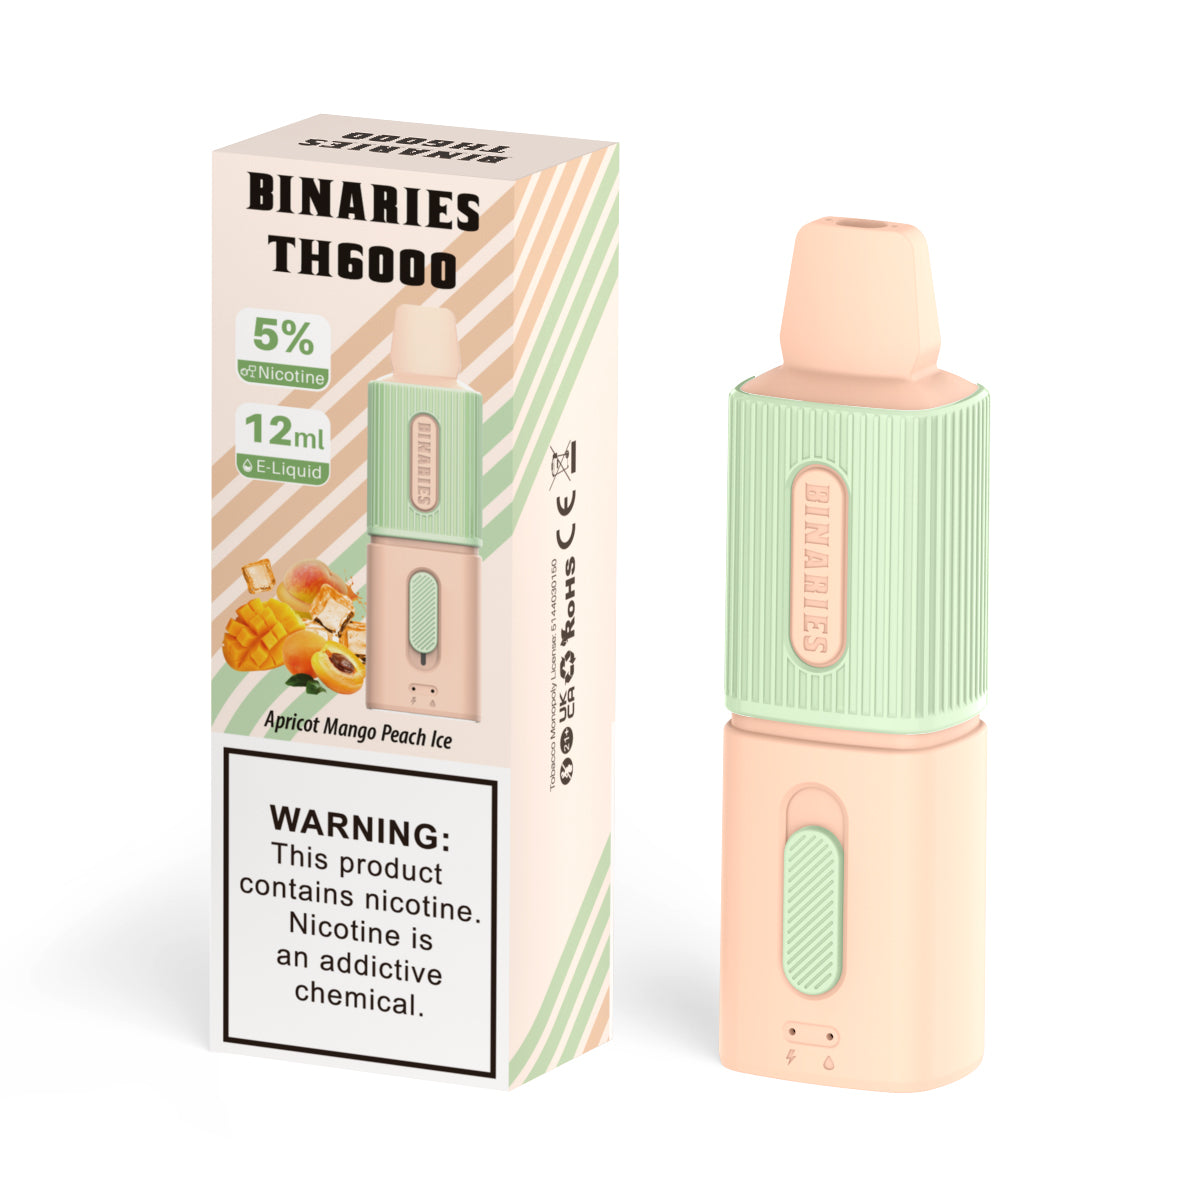 Binaries Cabin Disposable TH | 6000 Puffs | 12mL | 50mg Apricot Mango Peach Ice with Packaging